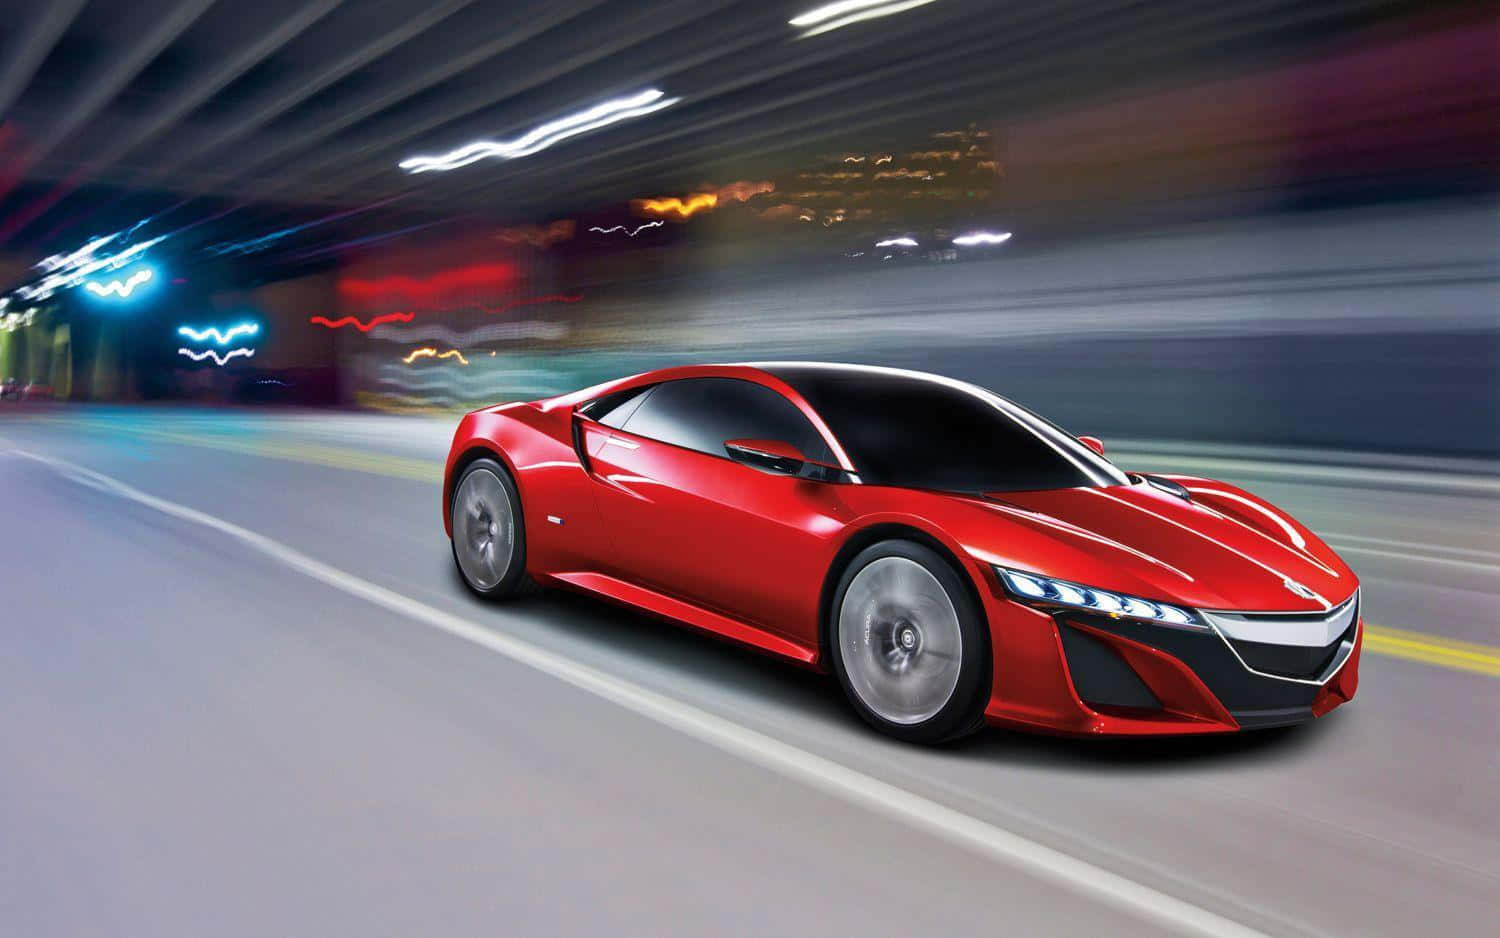 A stunning red Acura NSX showcased on an open road Wallpaper